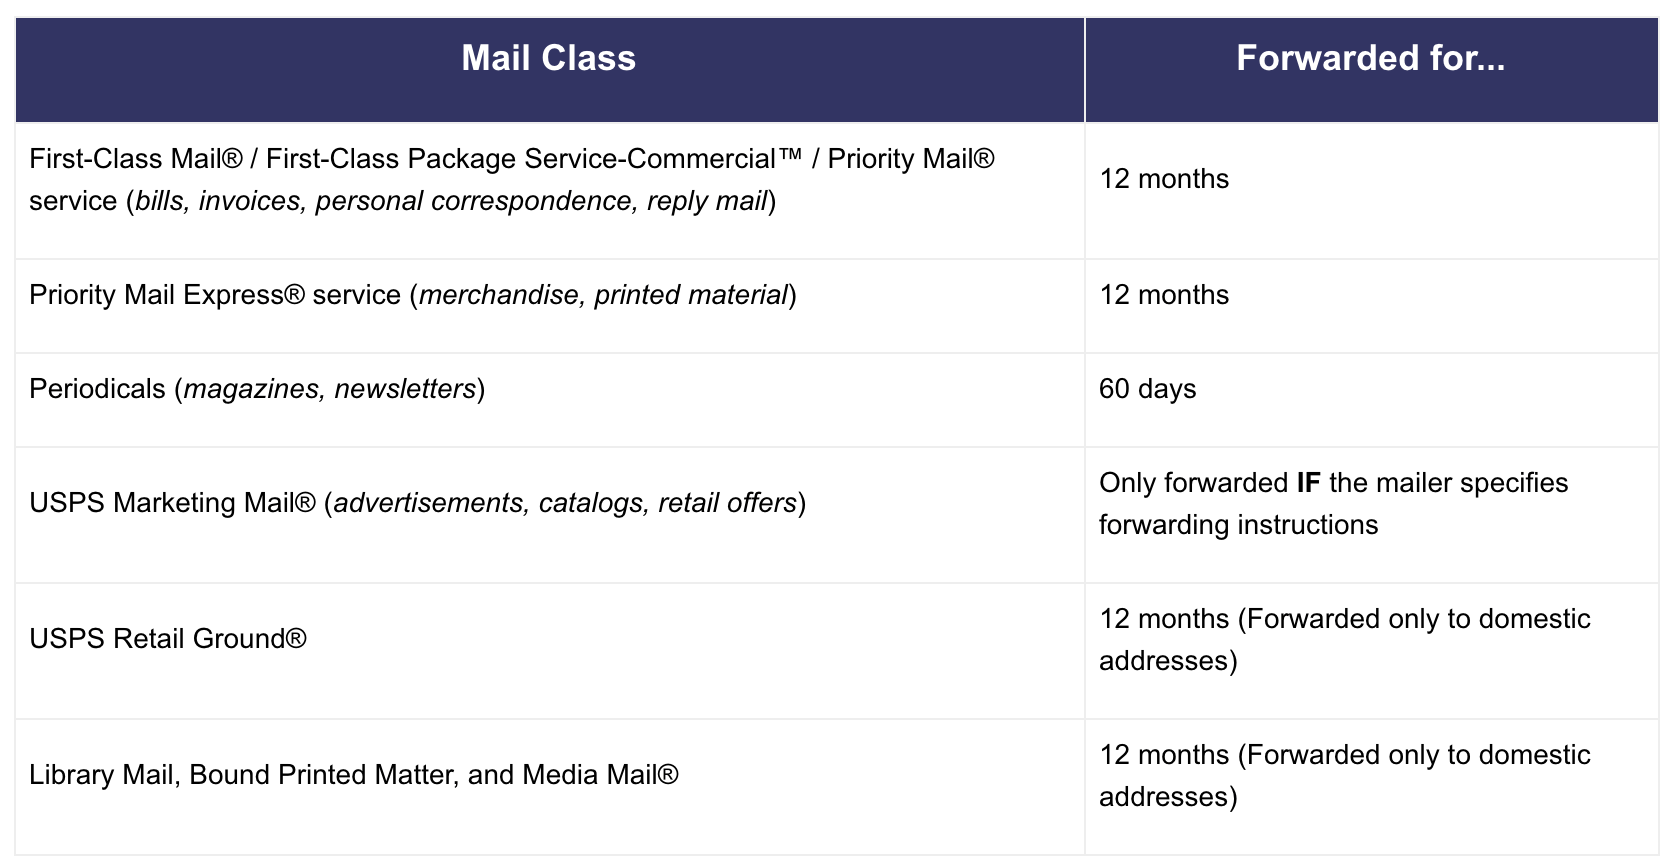 What Does Forwarded Mean USPS? + Other Common FAQs